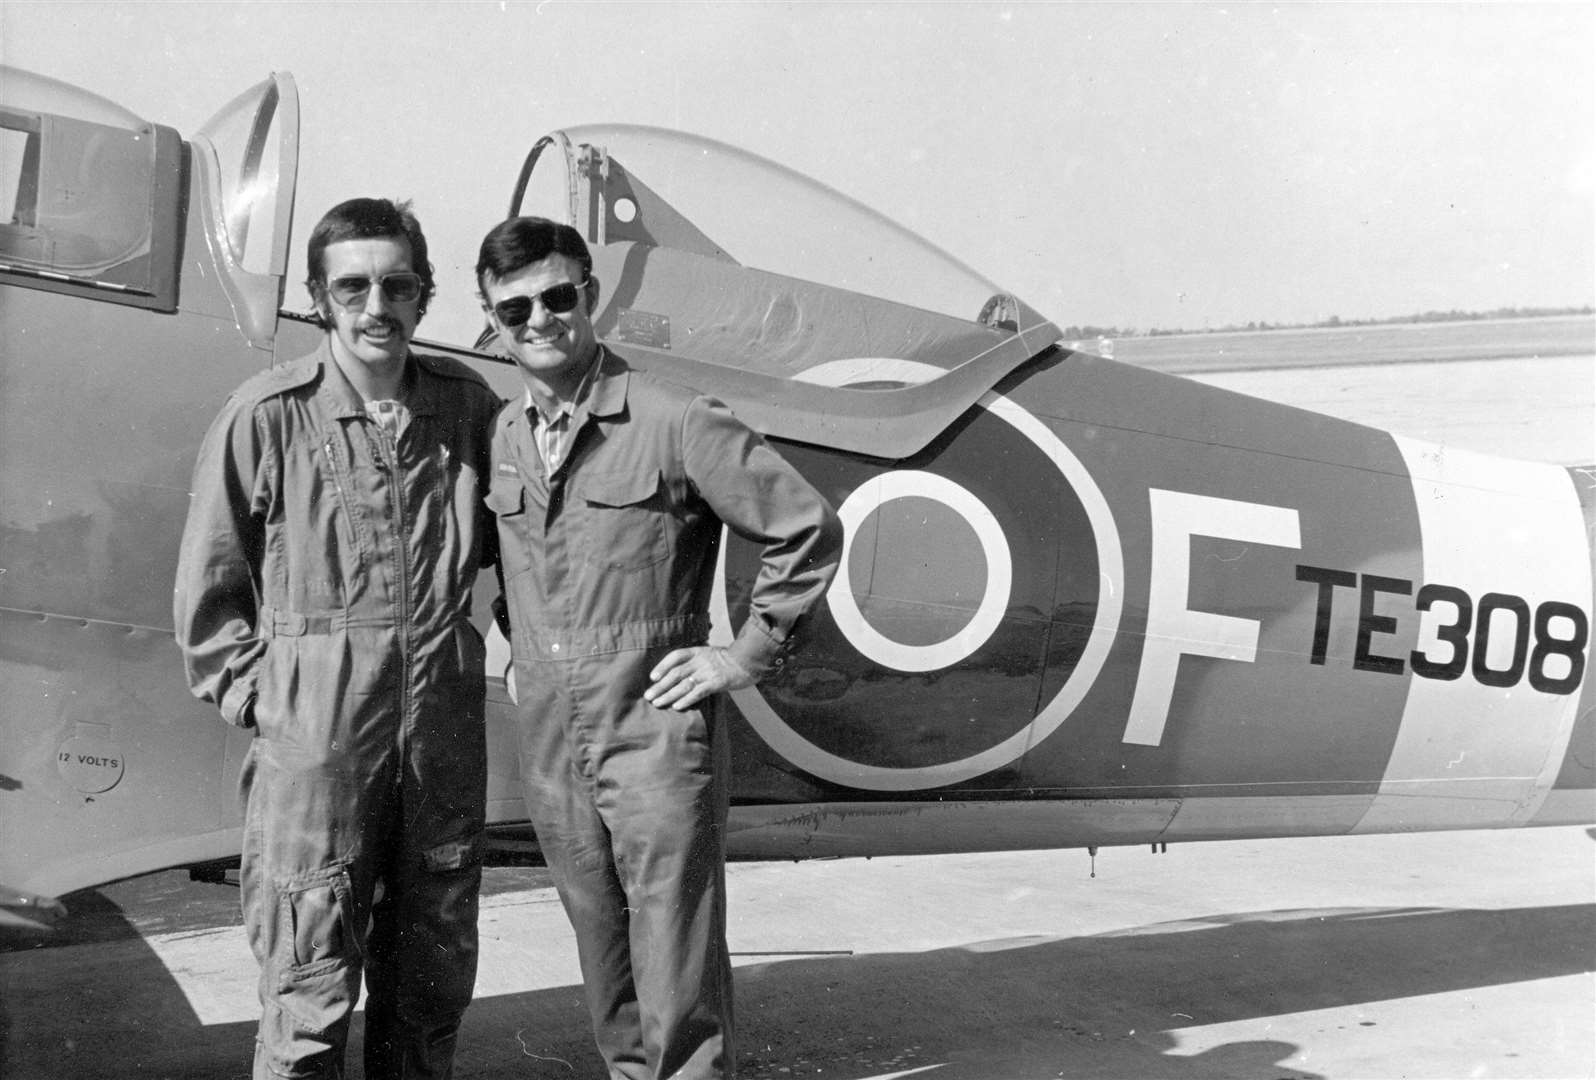 Peter Arnold alongside colleague Don Plumb next to Spitfire TE308 which was the first plane Peter flew in 1972 in Ontario, Canada